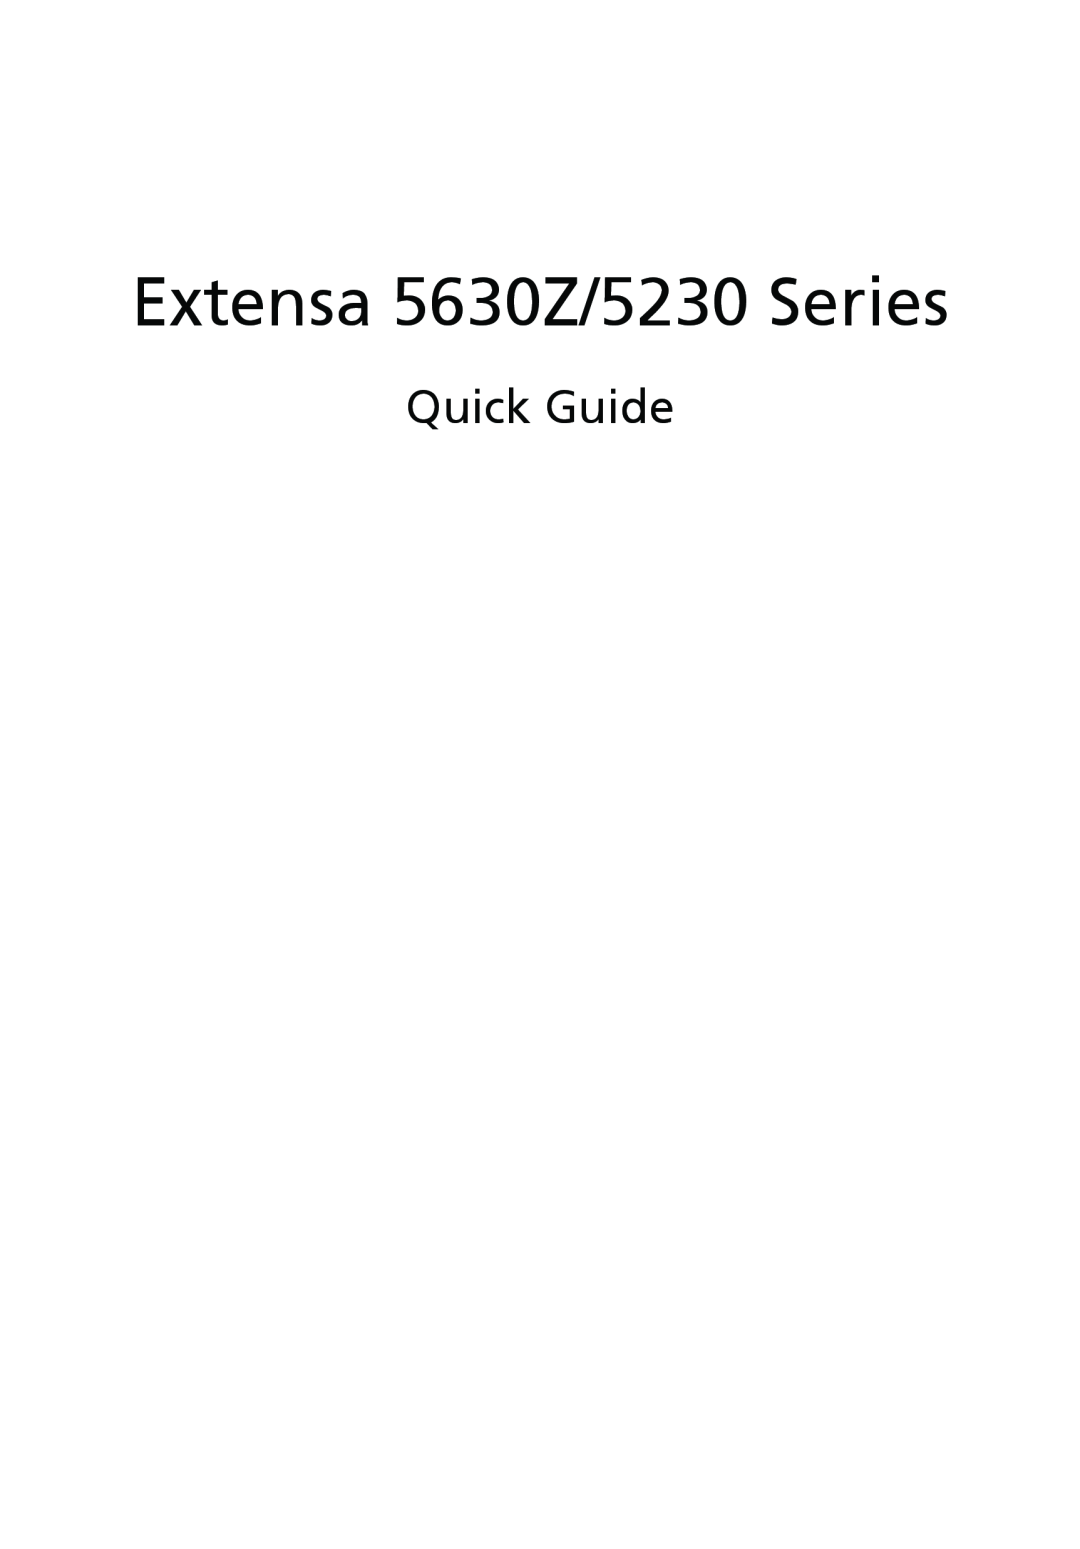 Acer 5630Z SERIES manual Quick Guide, Extensa 5630Z/5230 Series 